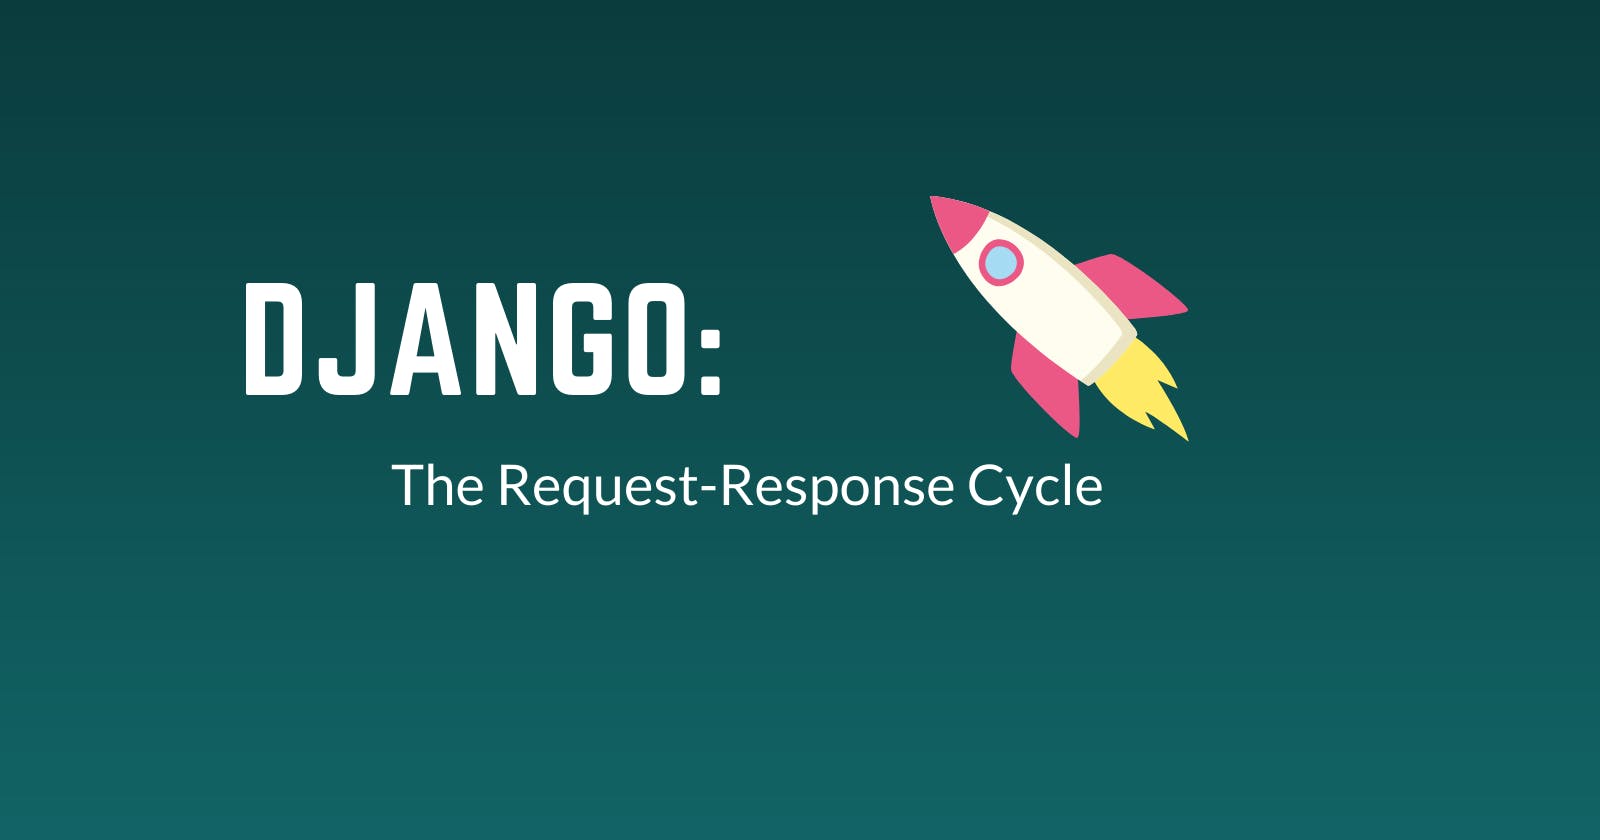 Django: The Request-Response Cycle